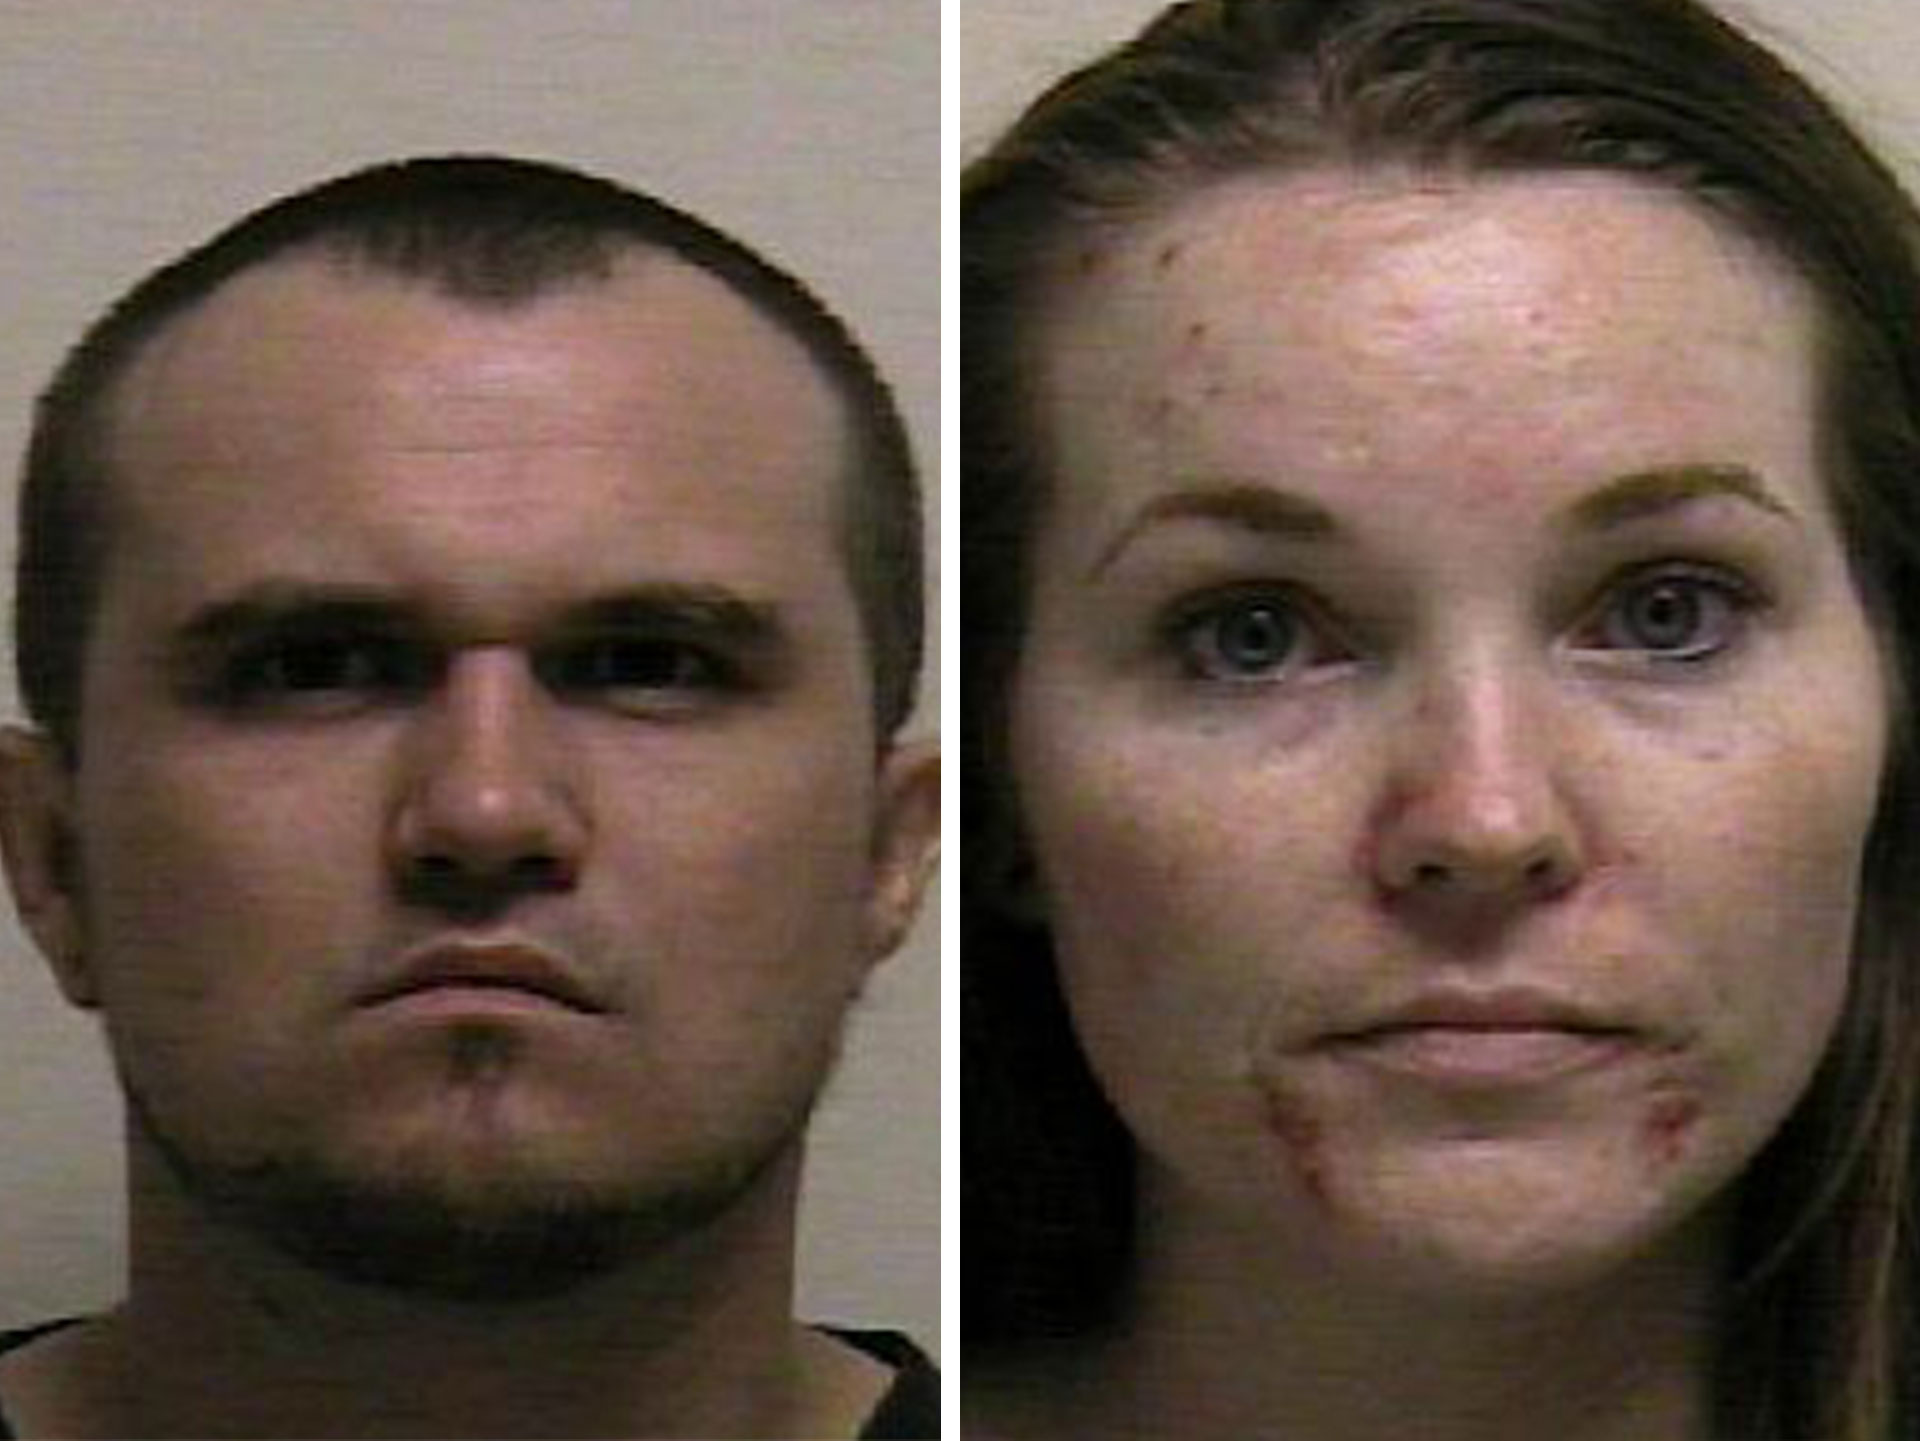 Parents of drug-addicted baby rub crushed up drugs onto gums just hours after she’s born